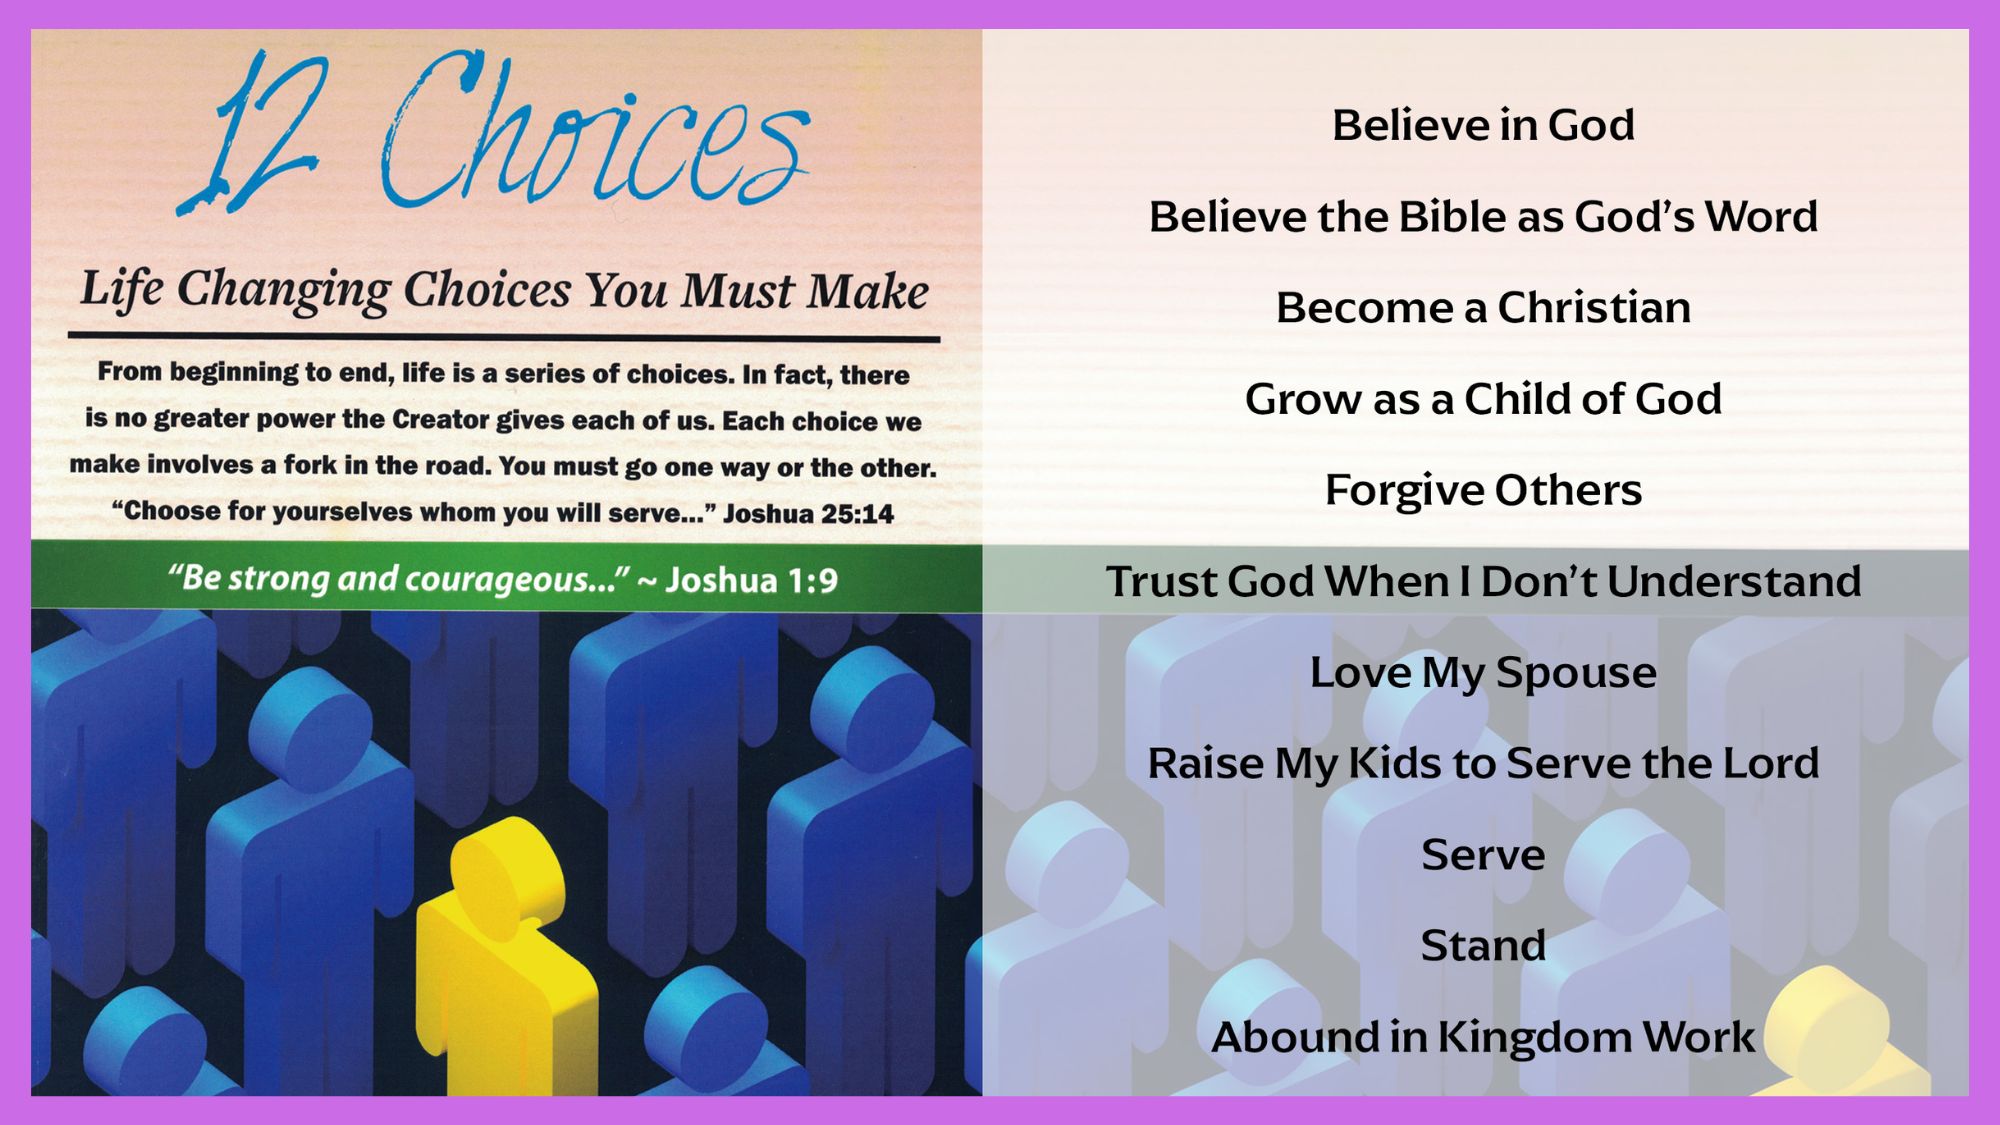 12 Choices - Life Changing Choices You Must Make: Choice # 11 Abound in Kingdom Work